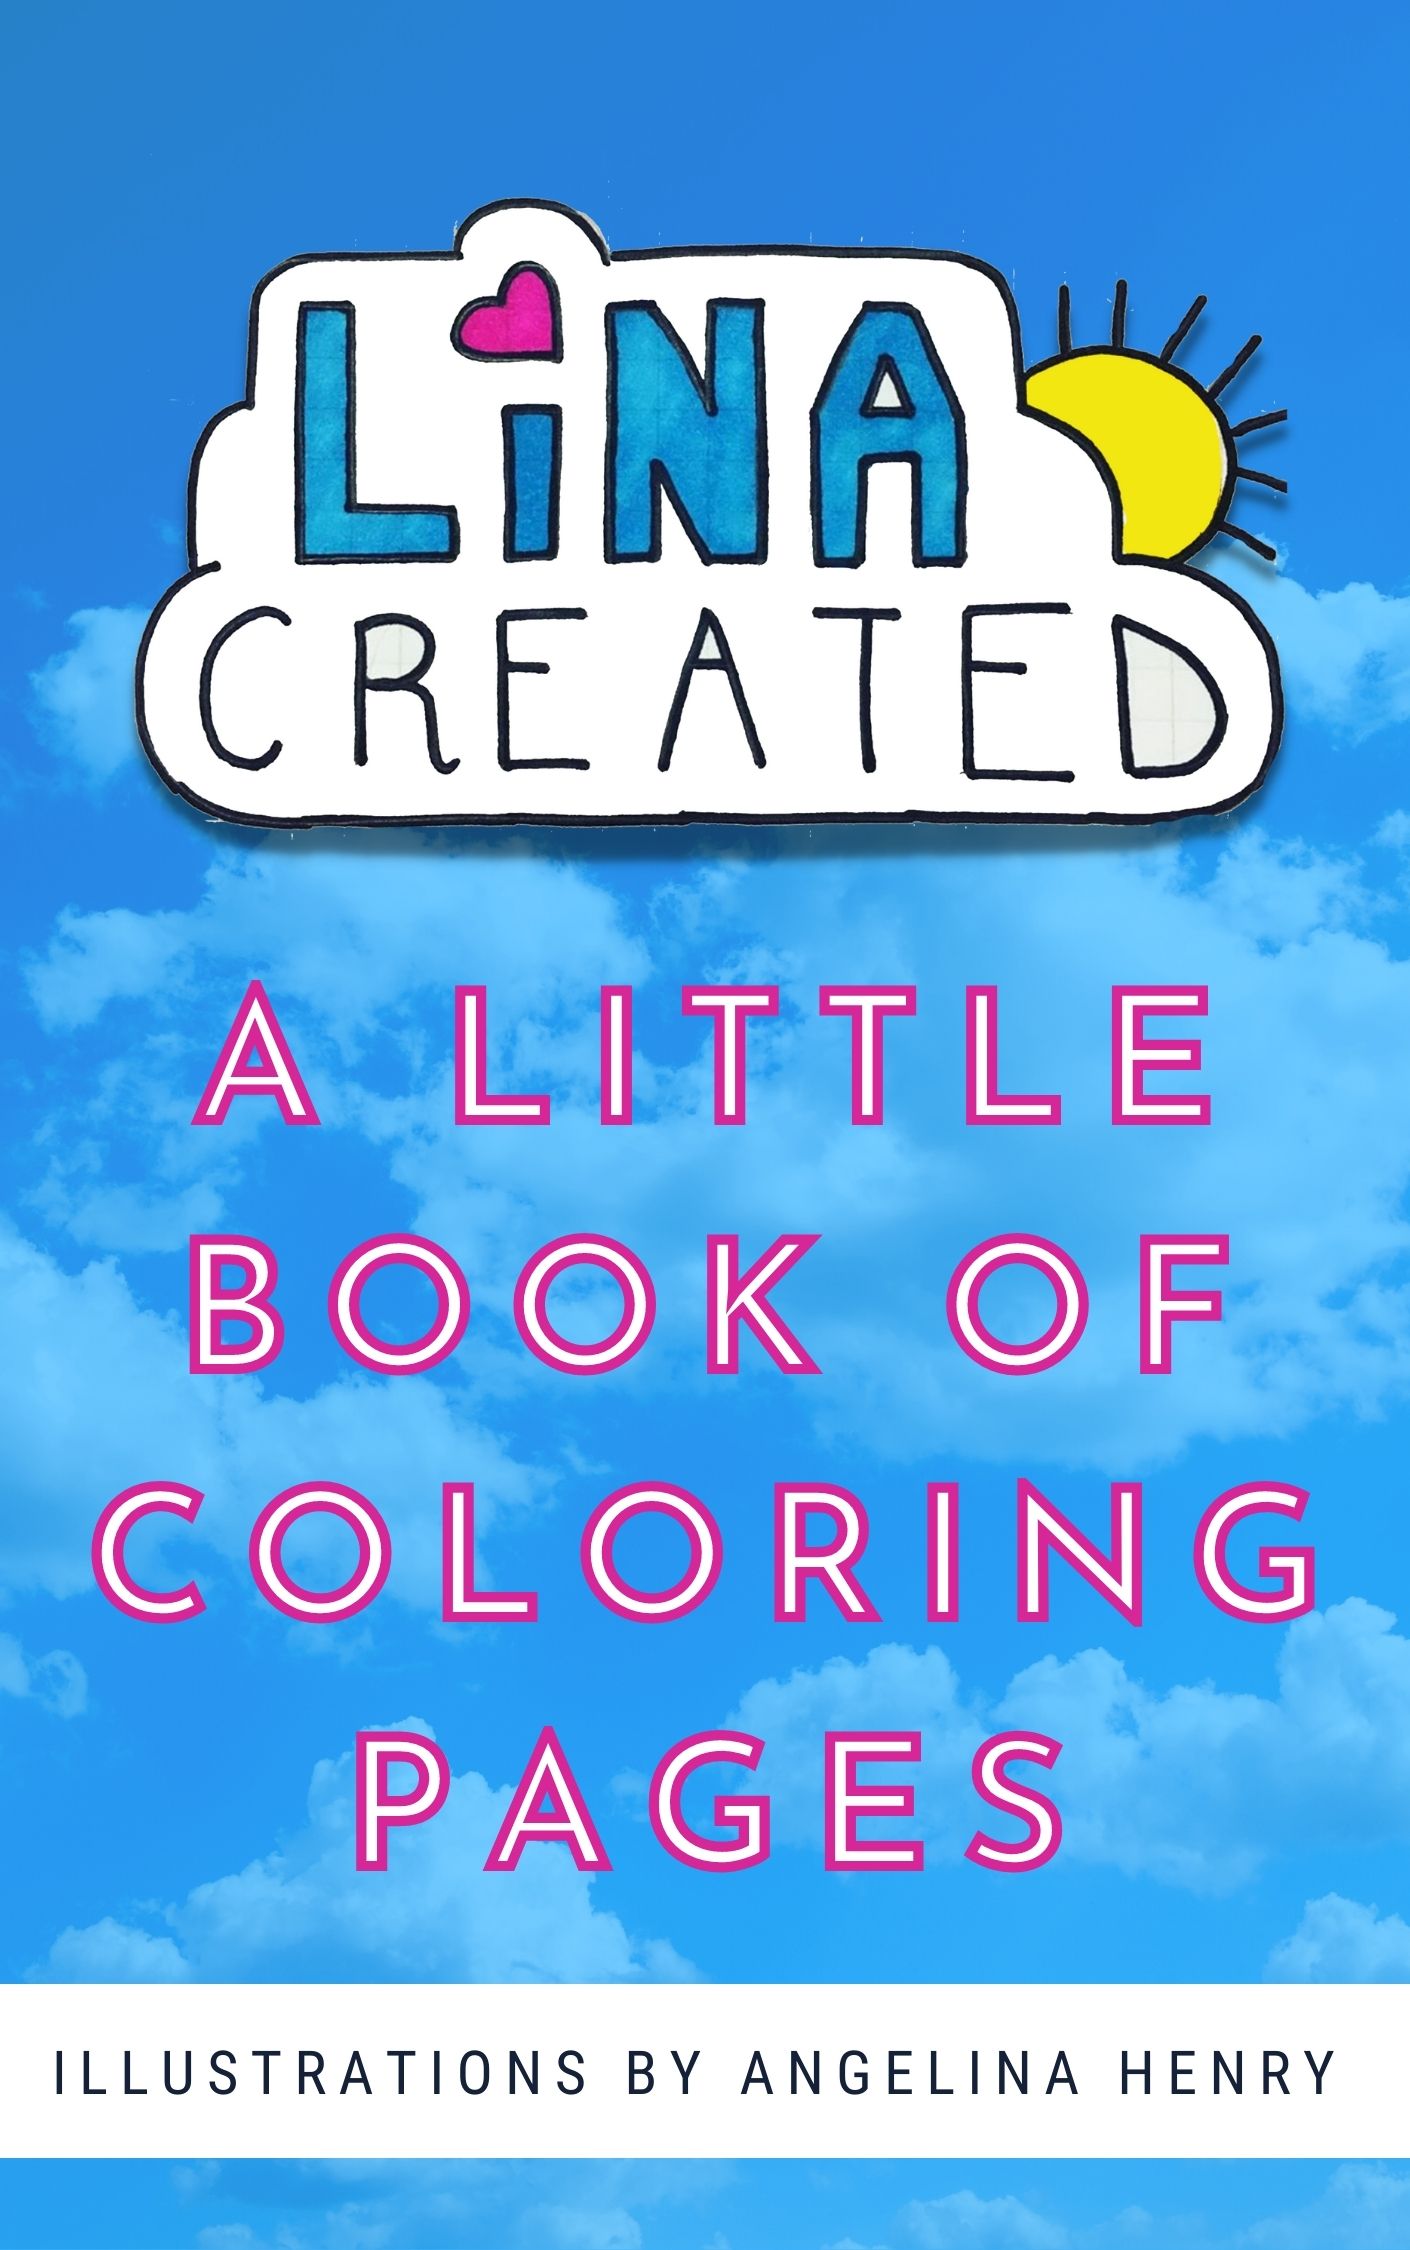 LinaCreated - A Little book of NFT Art Coloring pages